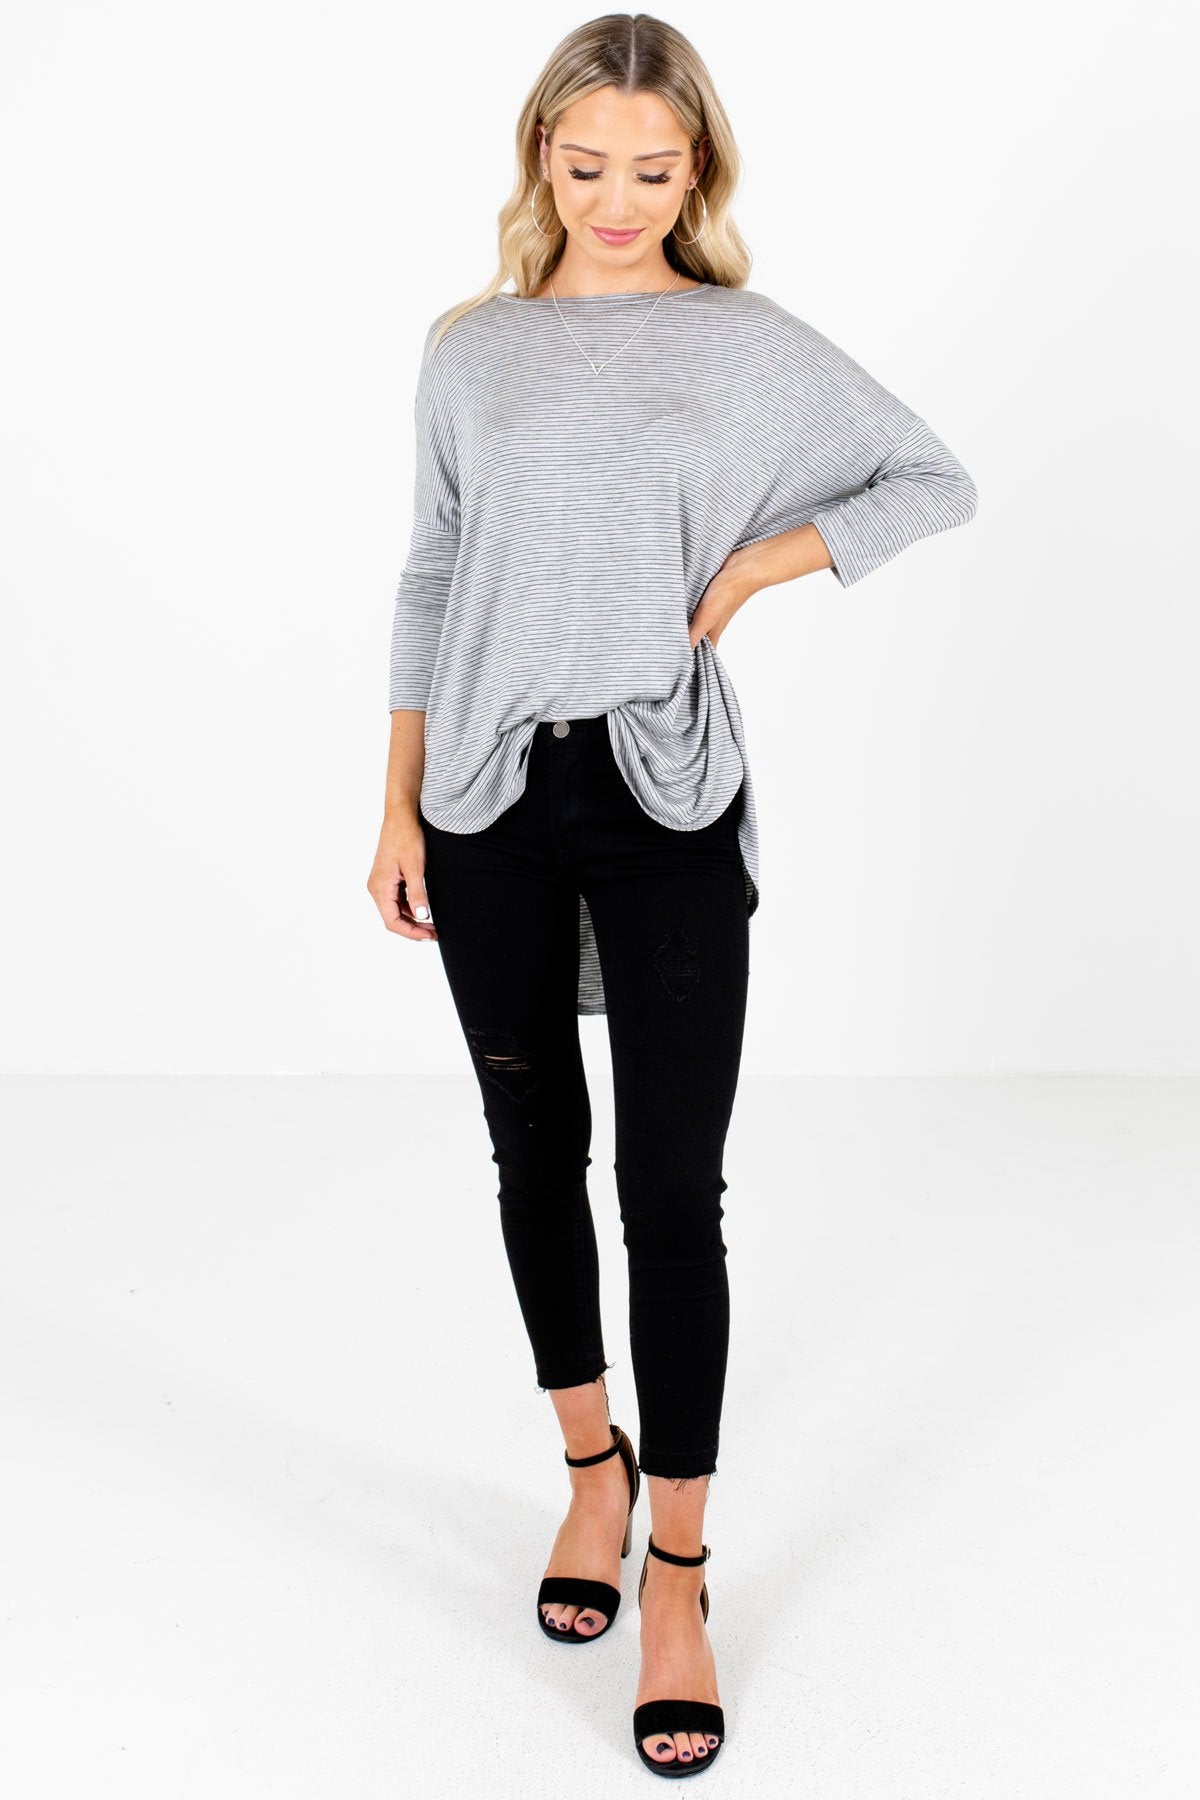 Women’s Gray Fall and Winter Boutique Clothing